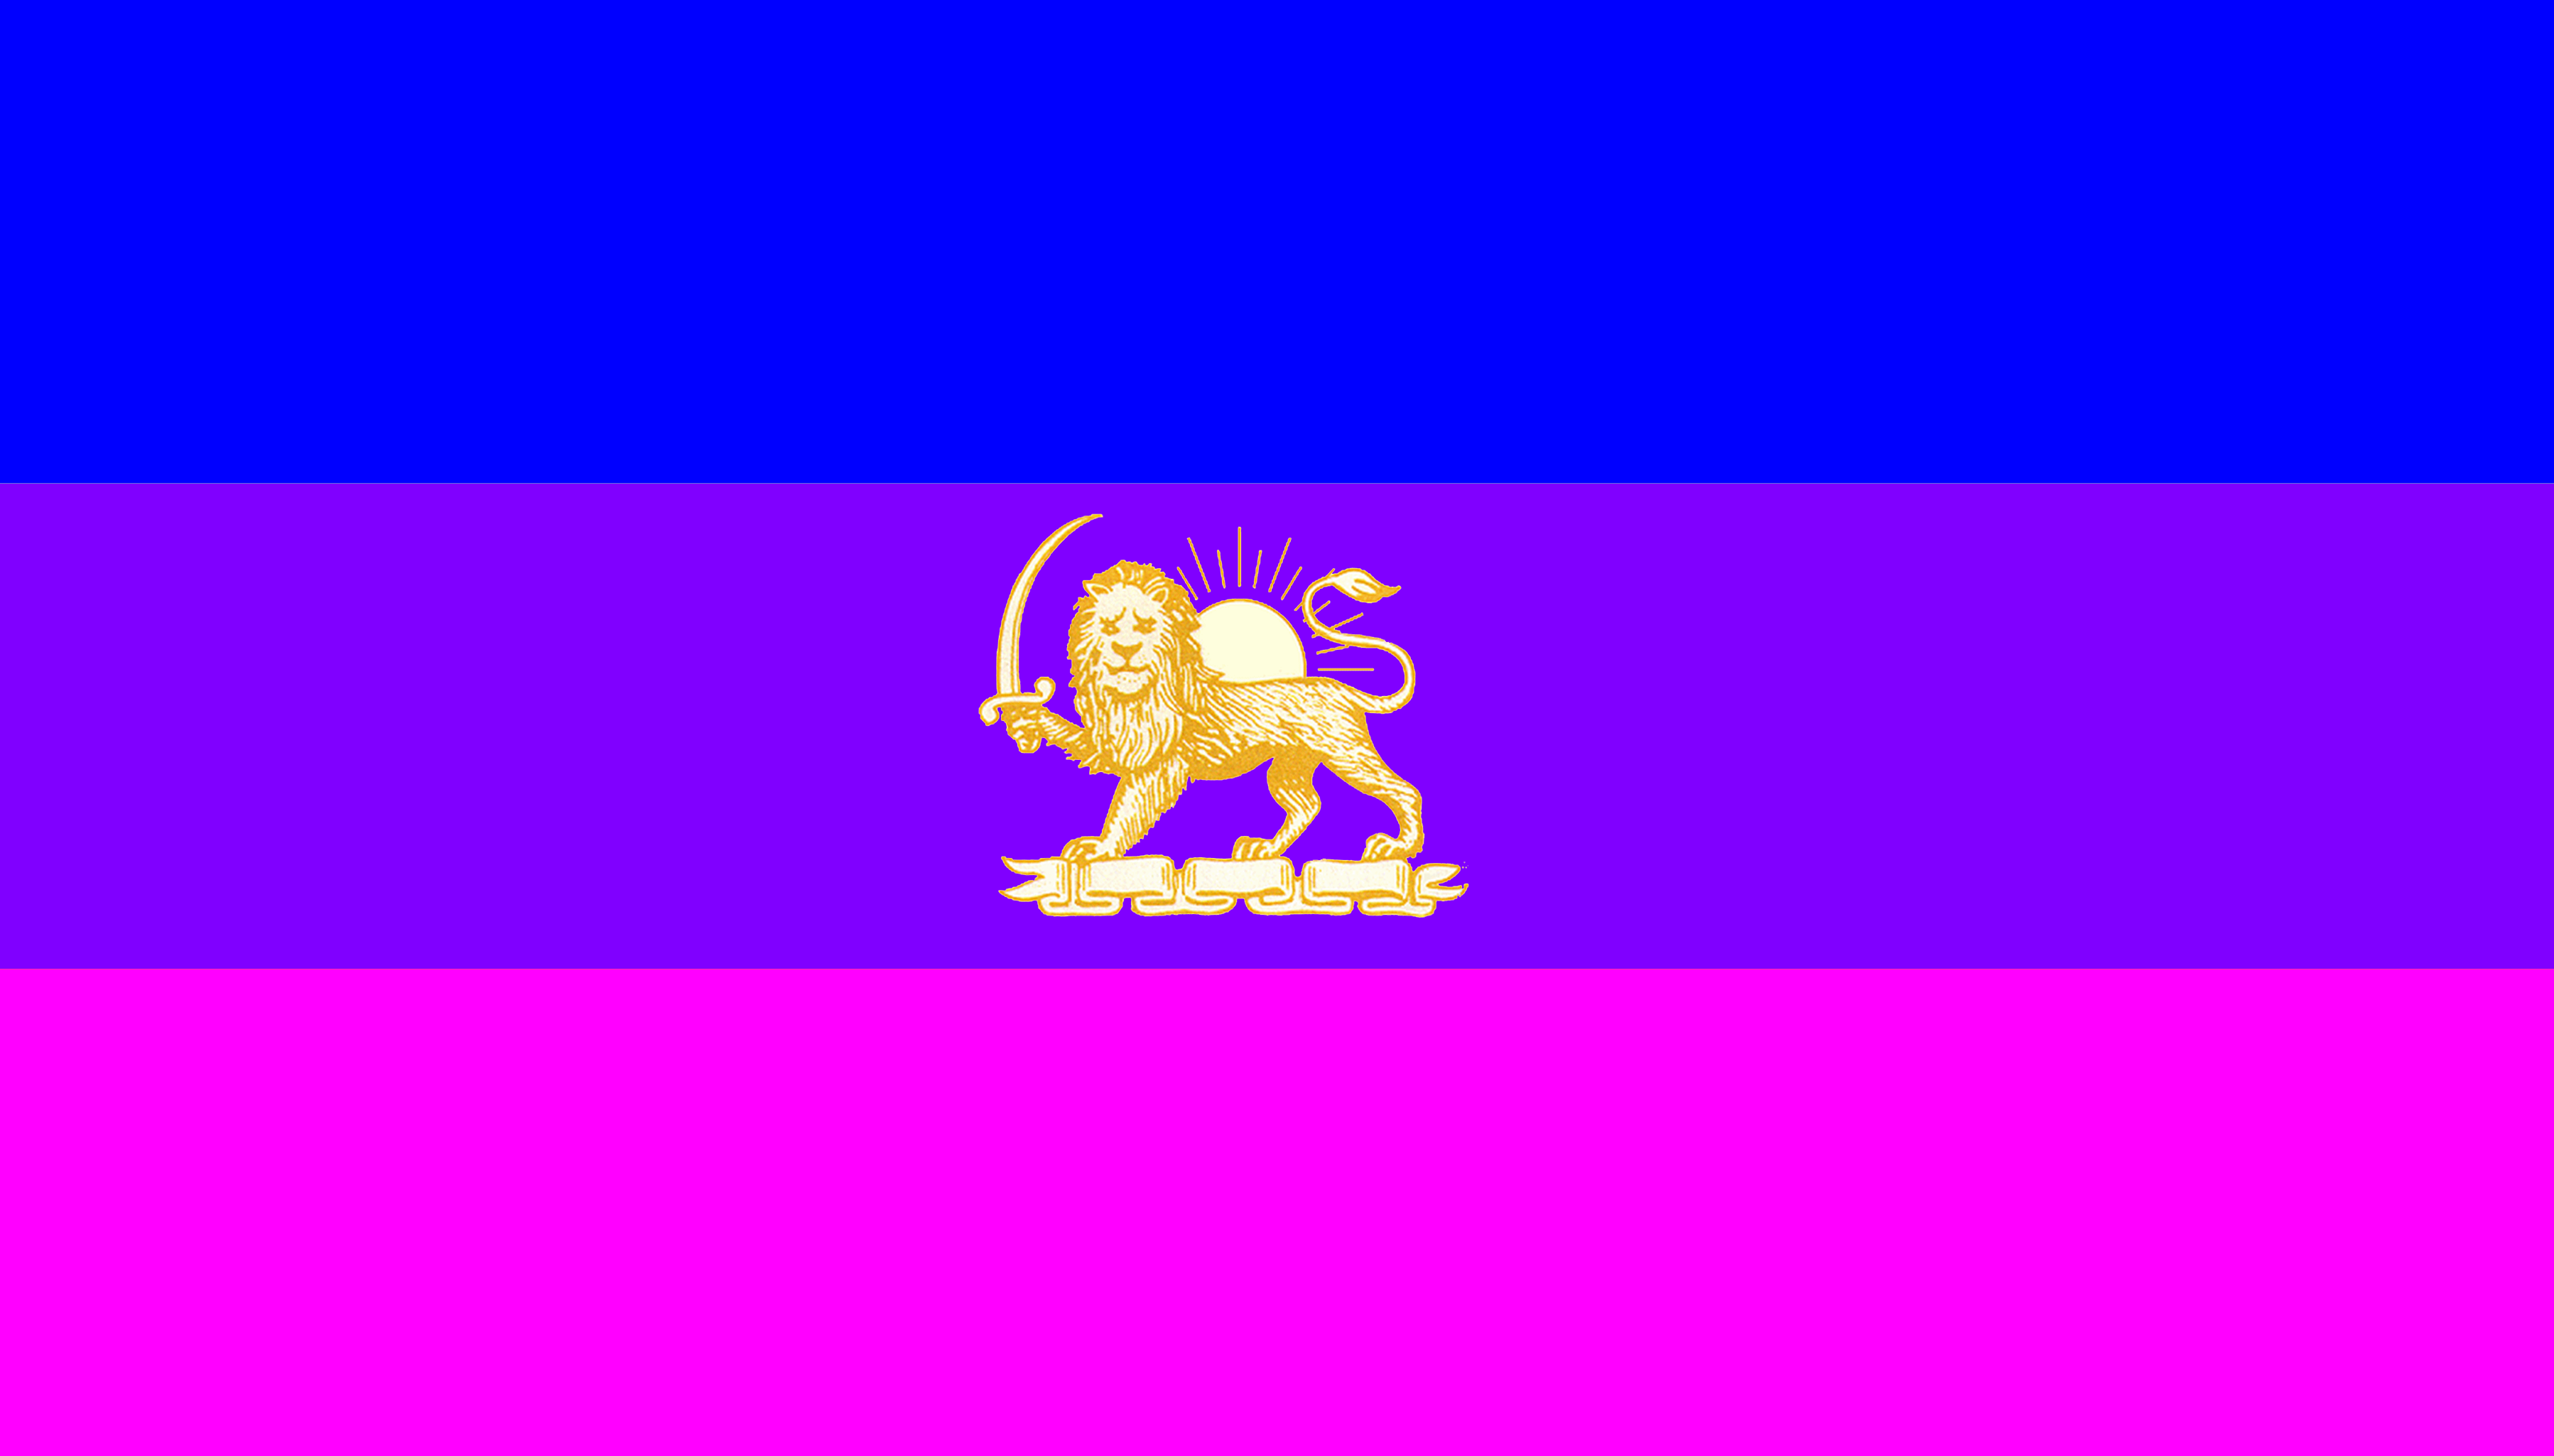 Bisexual Pride Flag wallpapers, Misc, HQ Bisexual Pride Flag pictures.